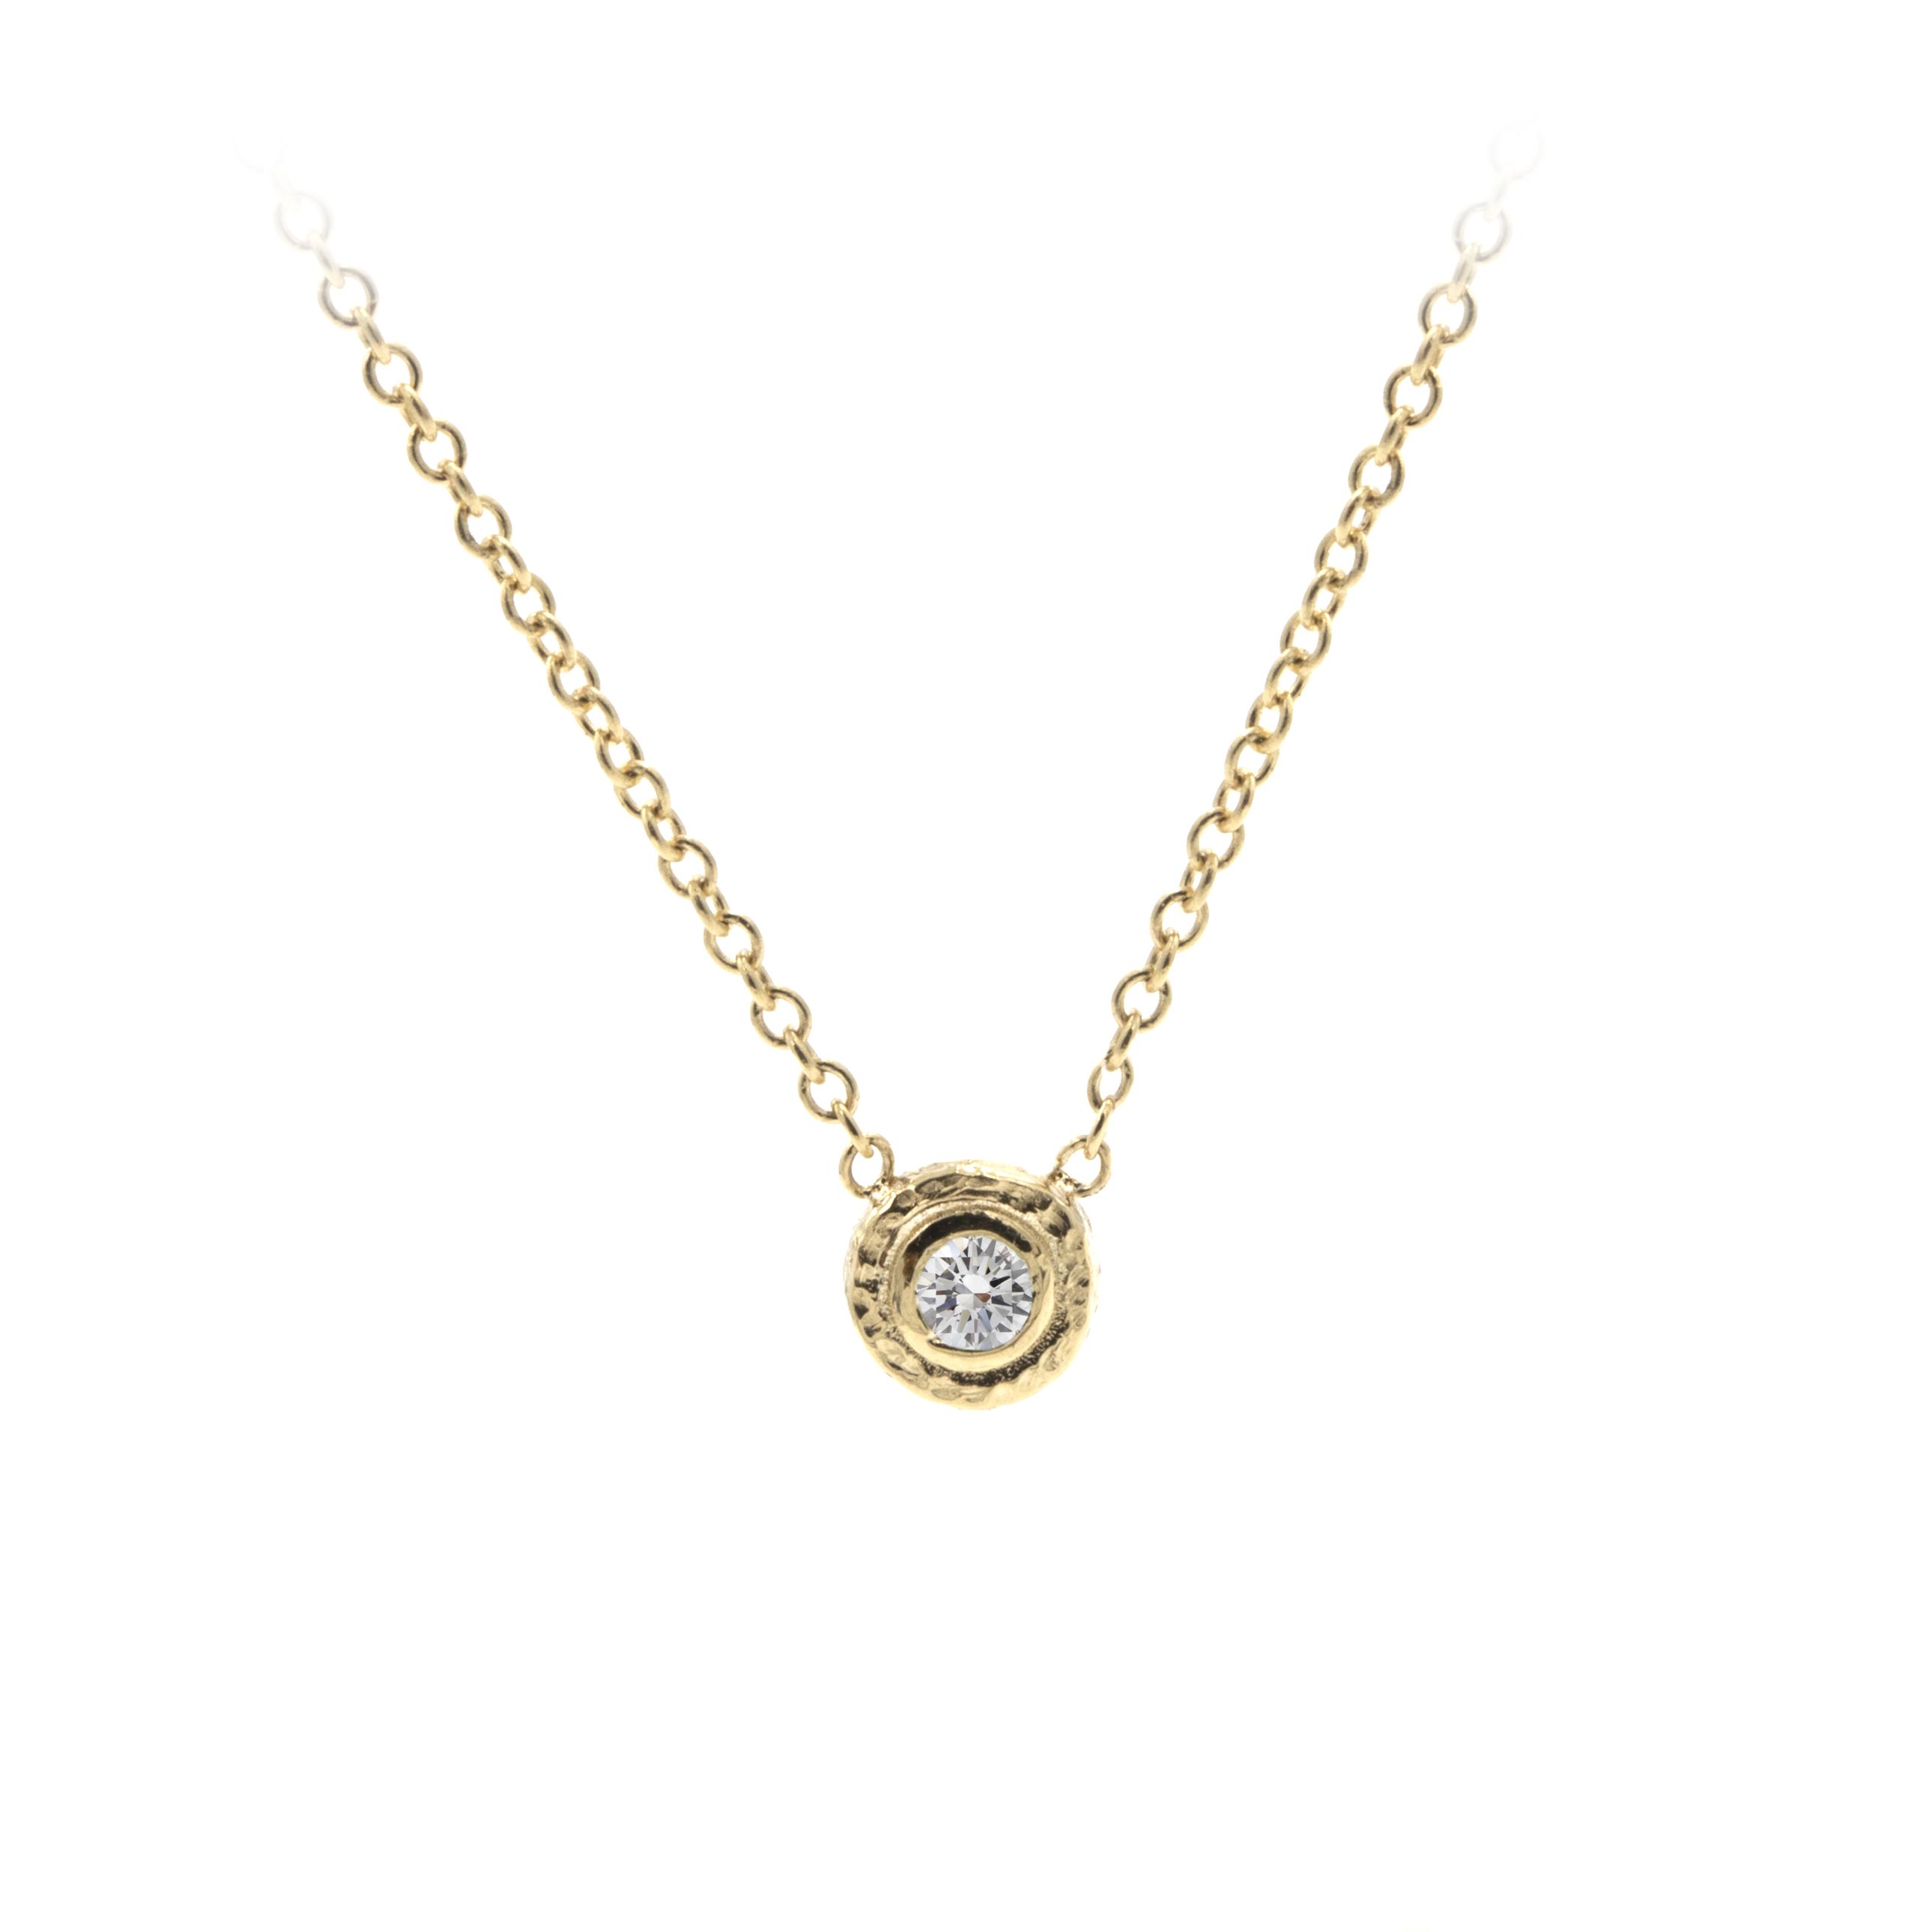 Product Image for Nesting Diamond Necklace